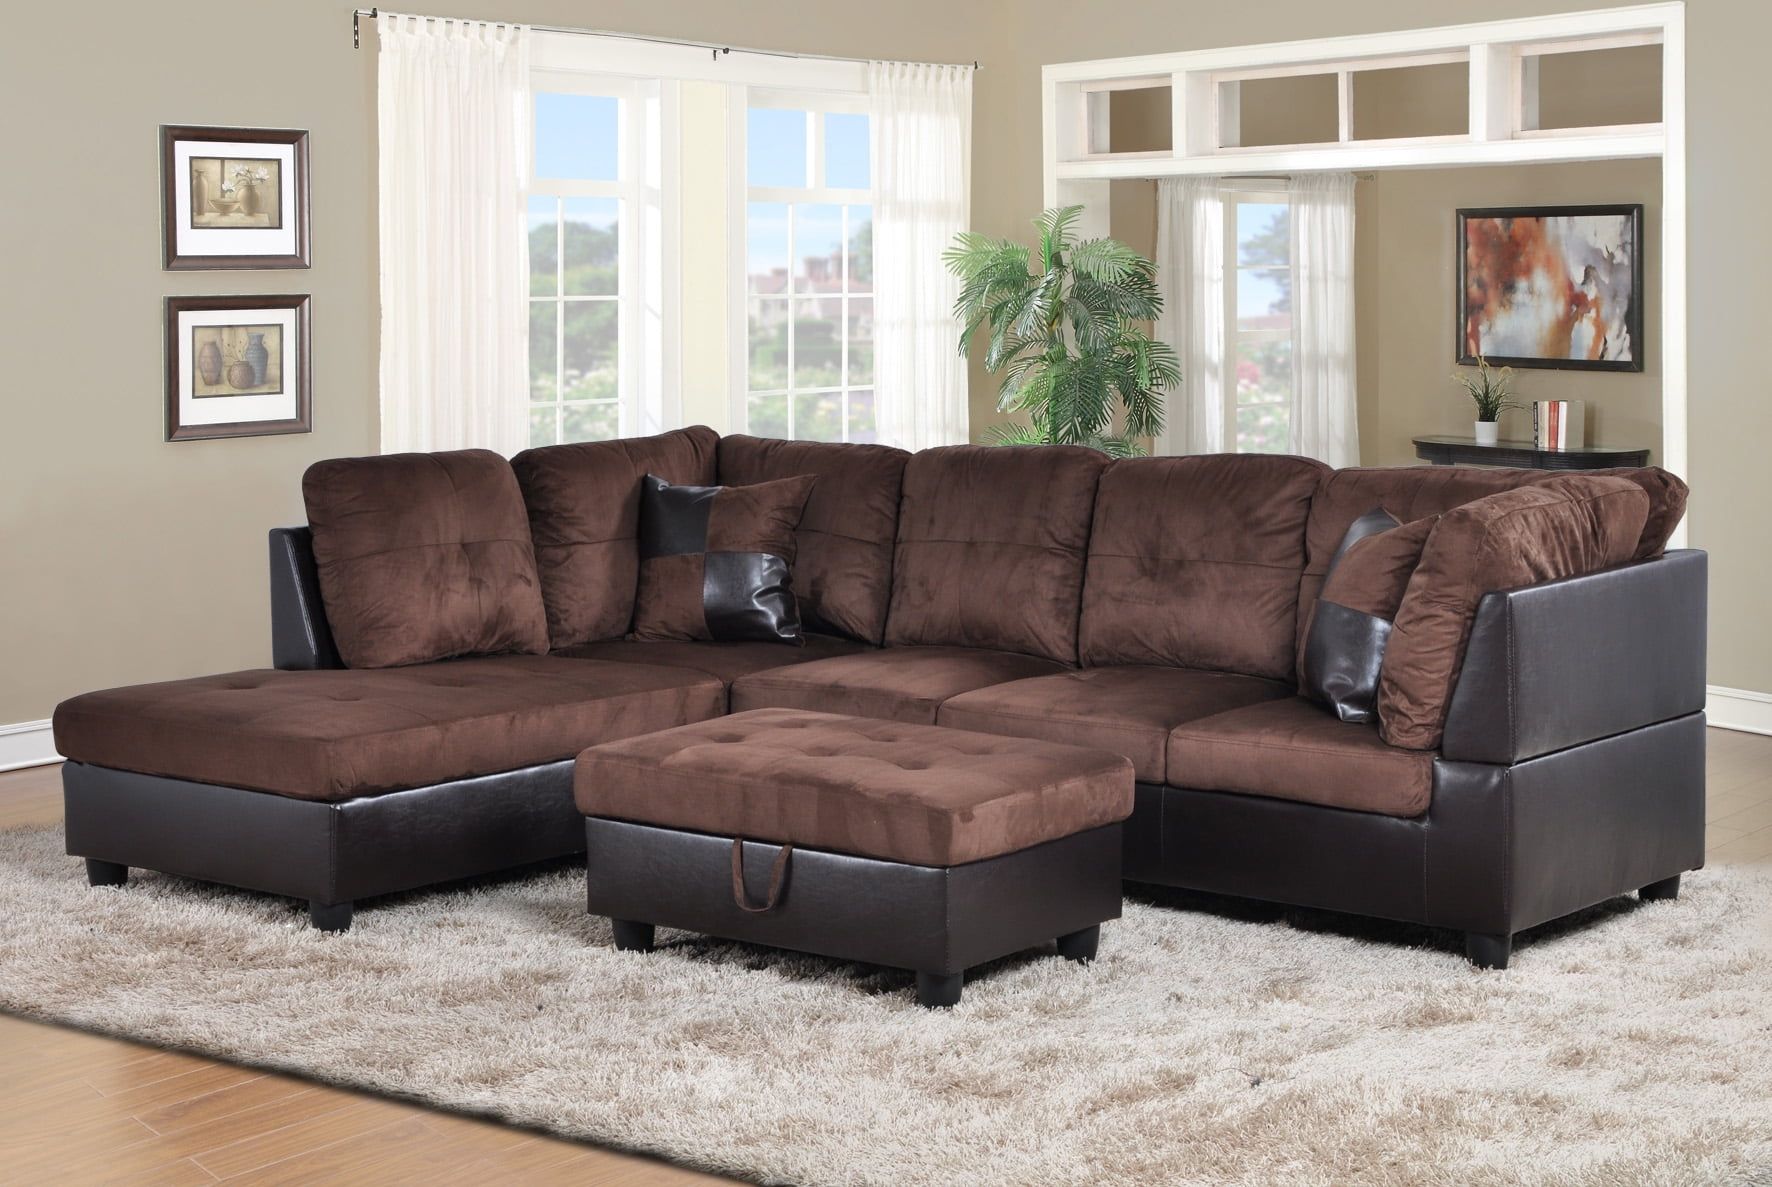 Ponliving Furniture Hermann Left Chaise Sectional Sofa With Storage Throughout Faux Leather Sofas In Chocolate Brown (View 16 of 20)